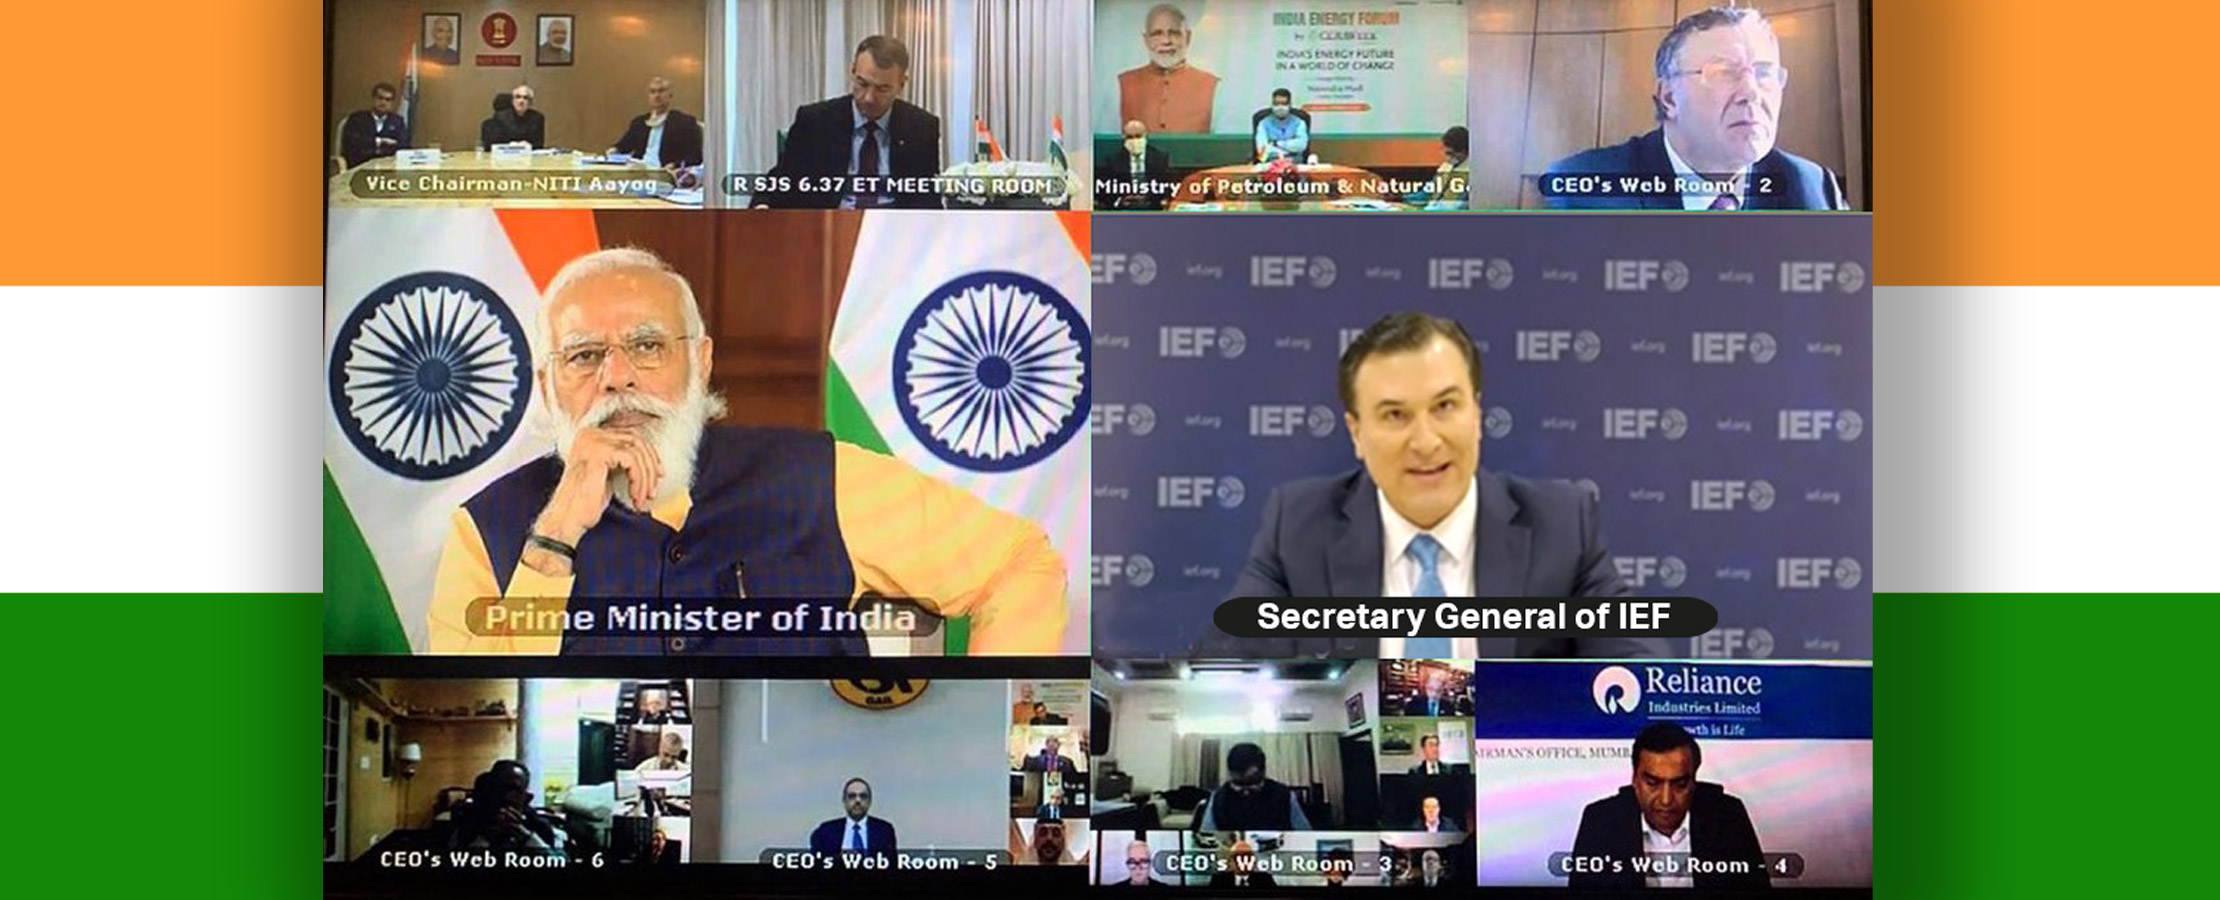 Secretary General Participates in India Energy Forum Global CEO Roundtable with Prime Minister Modi